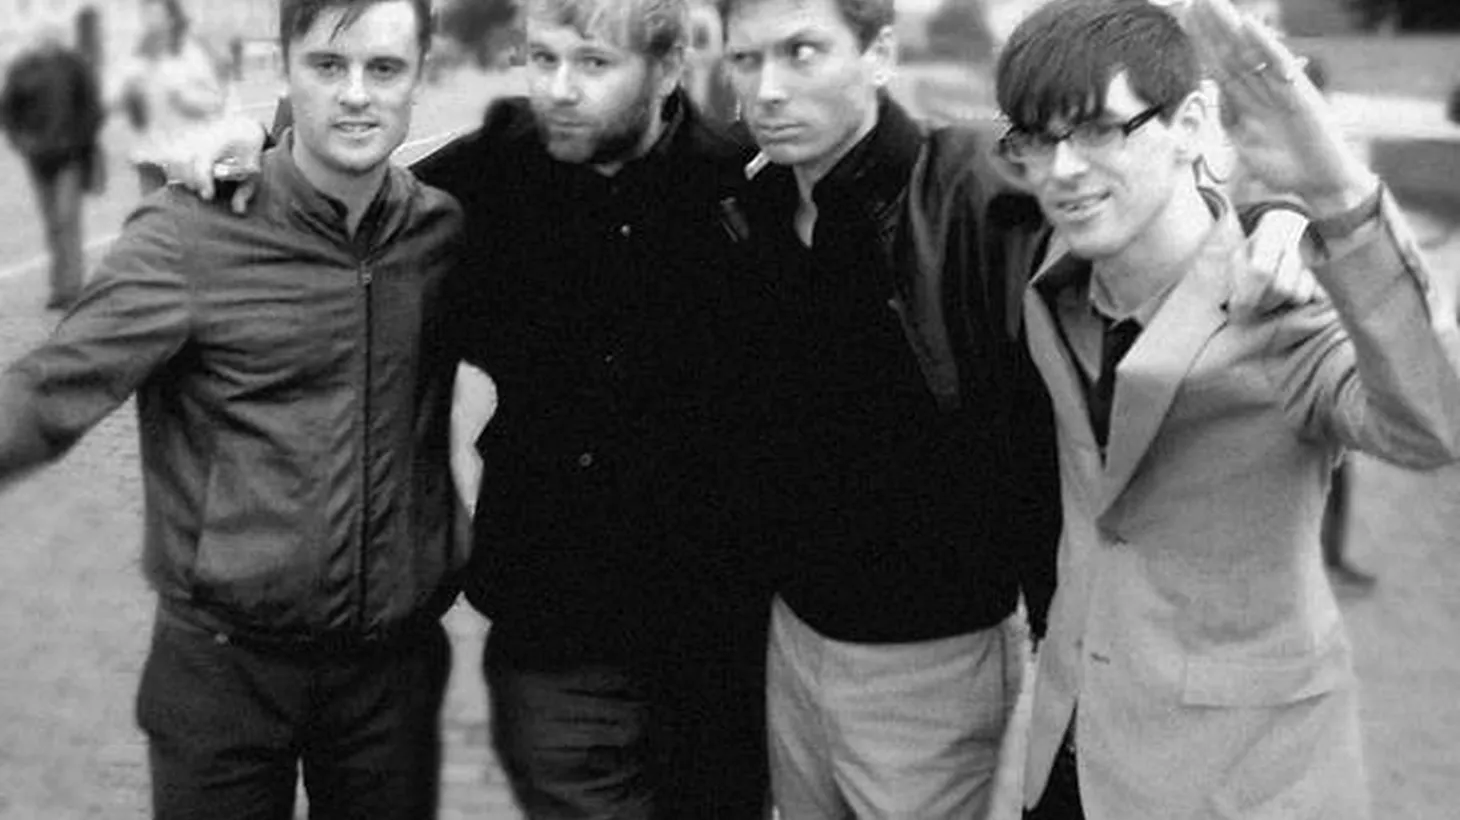 Franz Ferdinand are set to release a much anticipated new album at the end of August and will return to the radio station that gave them their first break to play their new songs live.